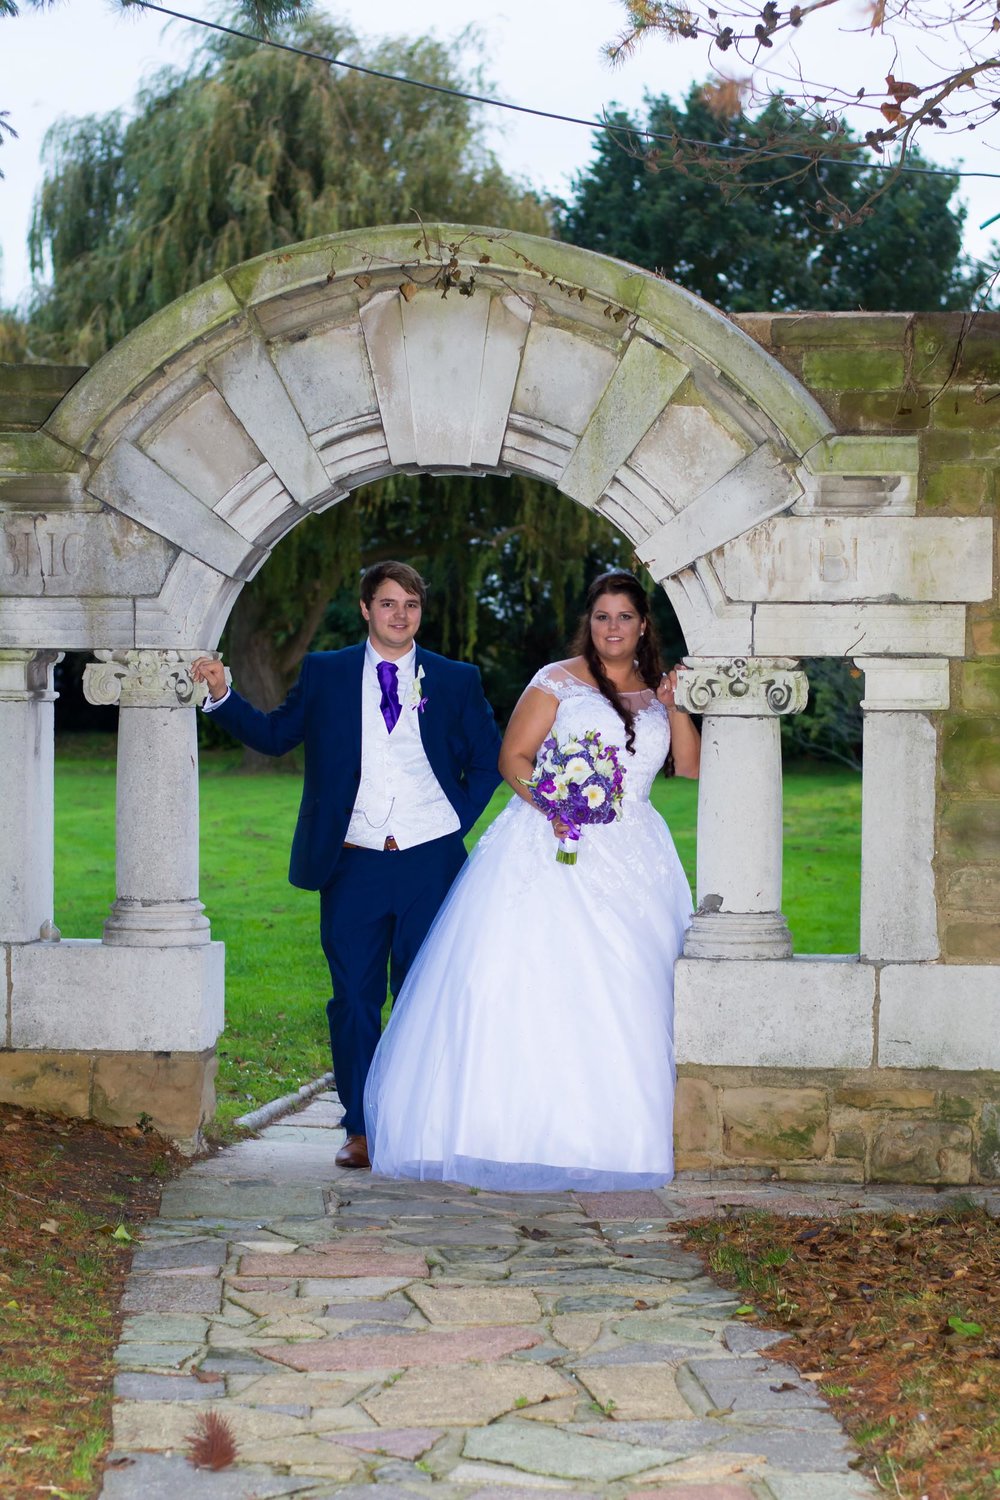 Ye Olde Plough House with bride and groom under one of the arches